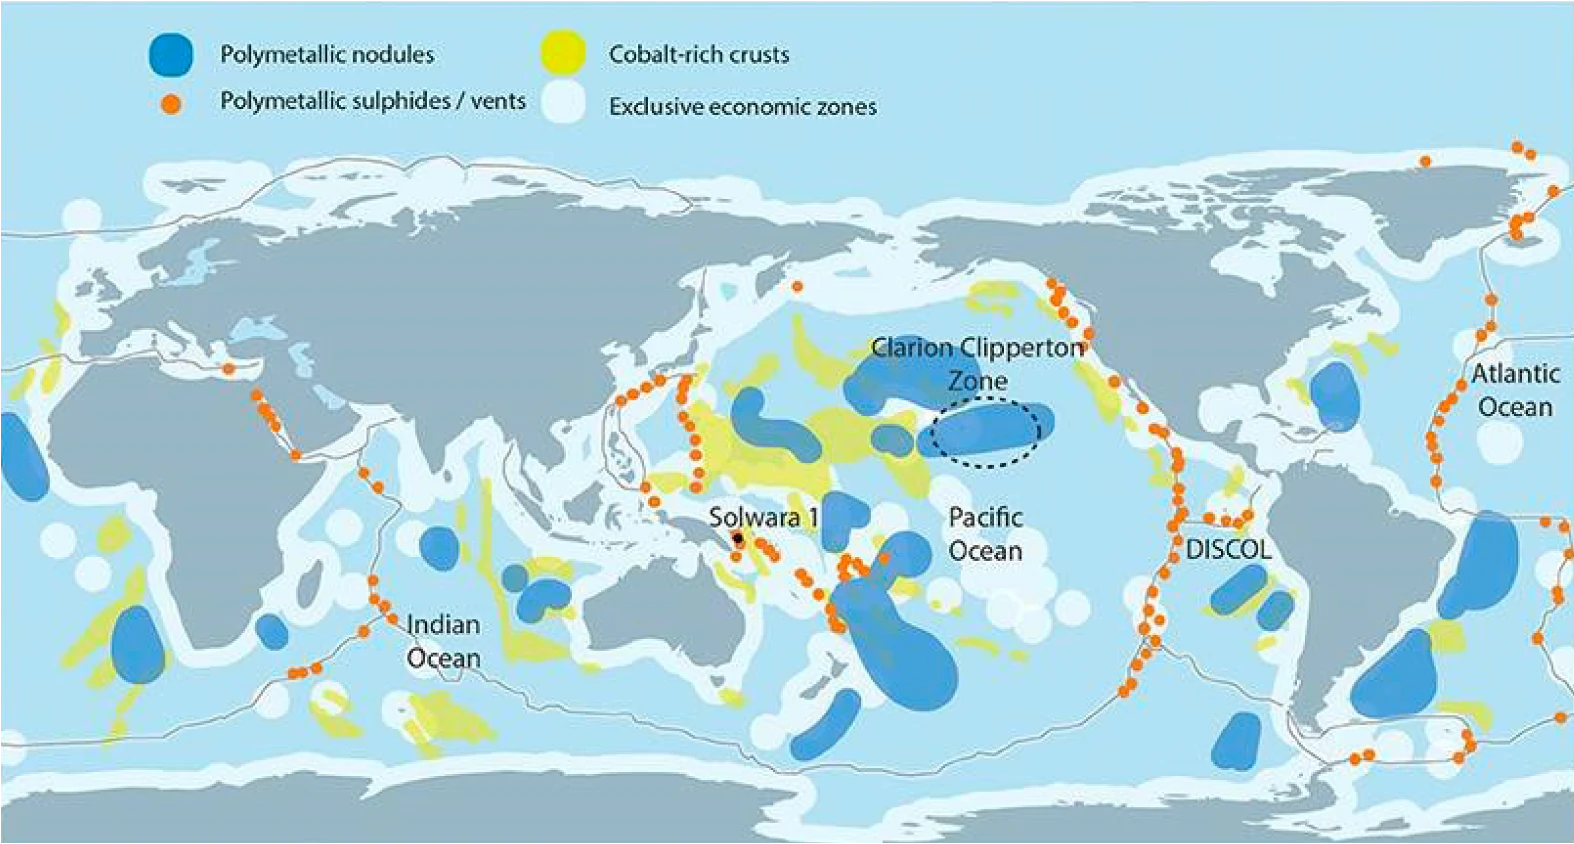 Map of the world indicating the location of subsea minerals